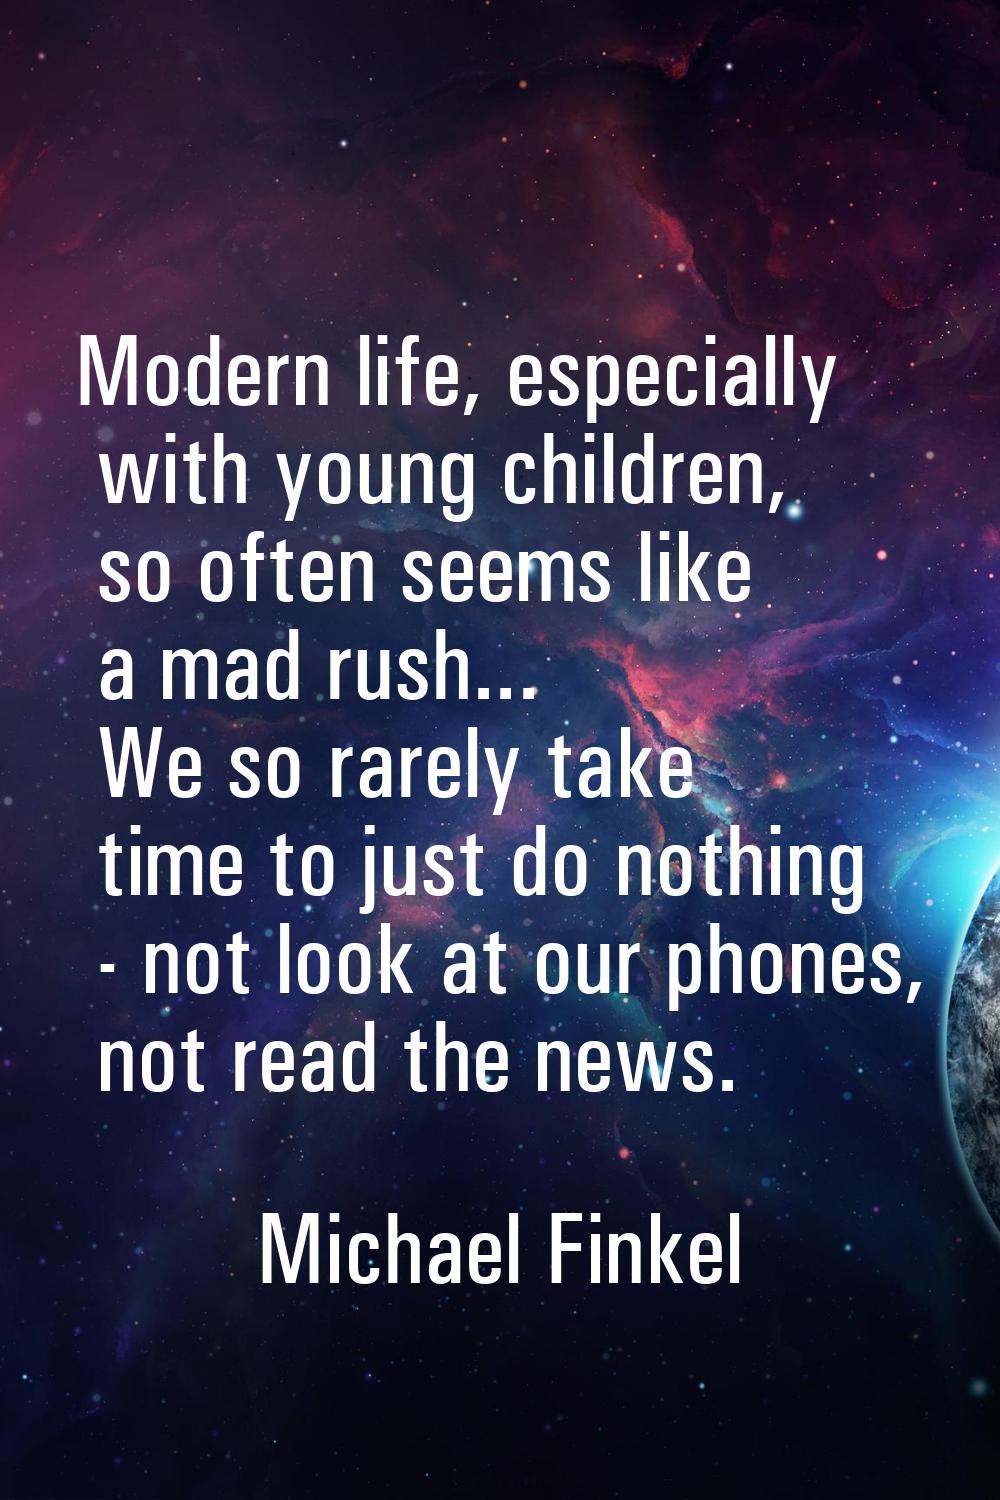 Modern life, especially with young children, so often seems like a mad rush... We so rarely take ti